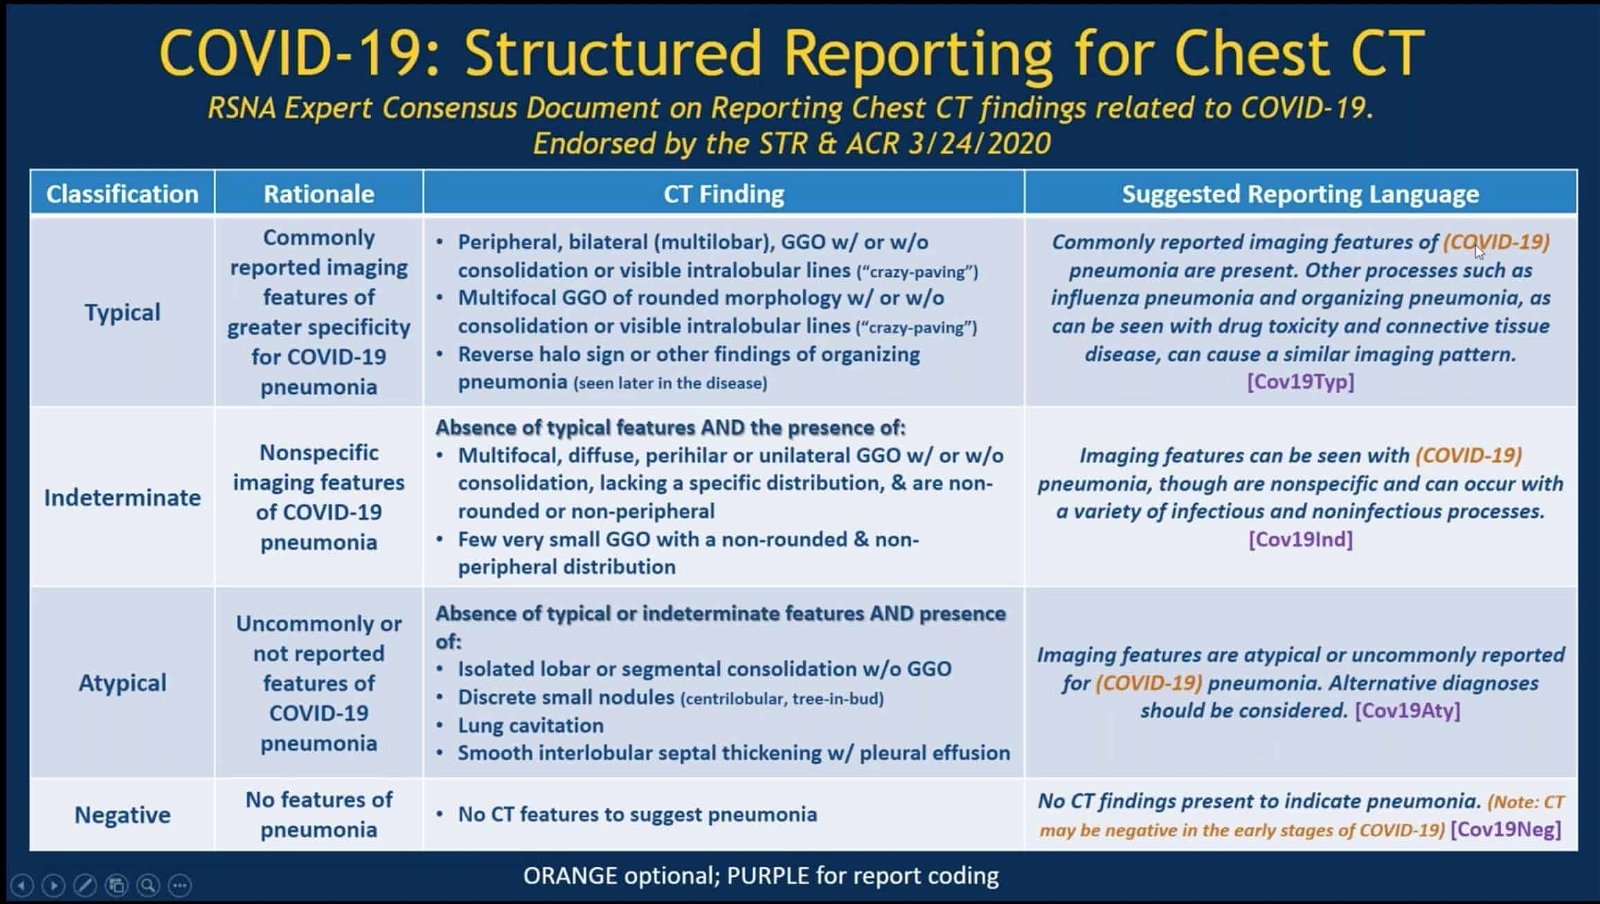 Structured reporting template for radiology reporting of coronavirus COVID-19 pneumonia by RSNA